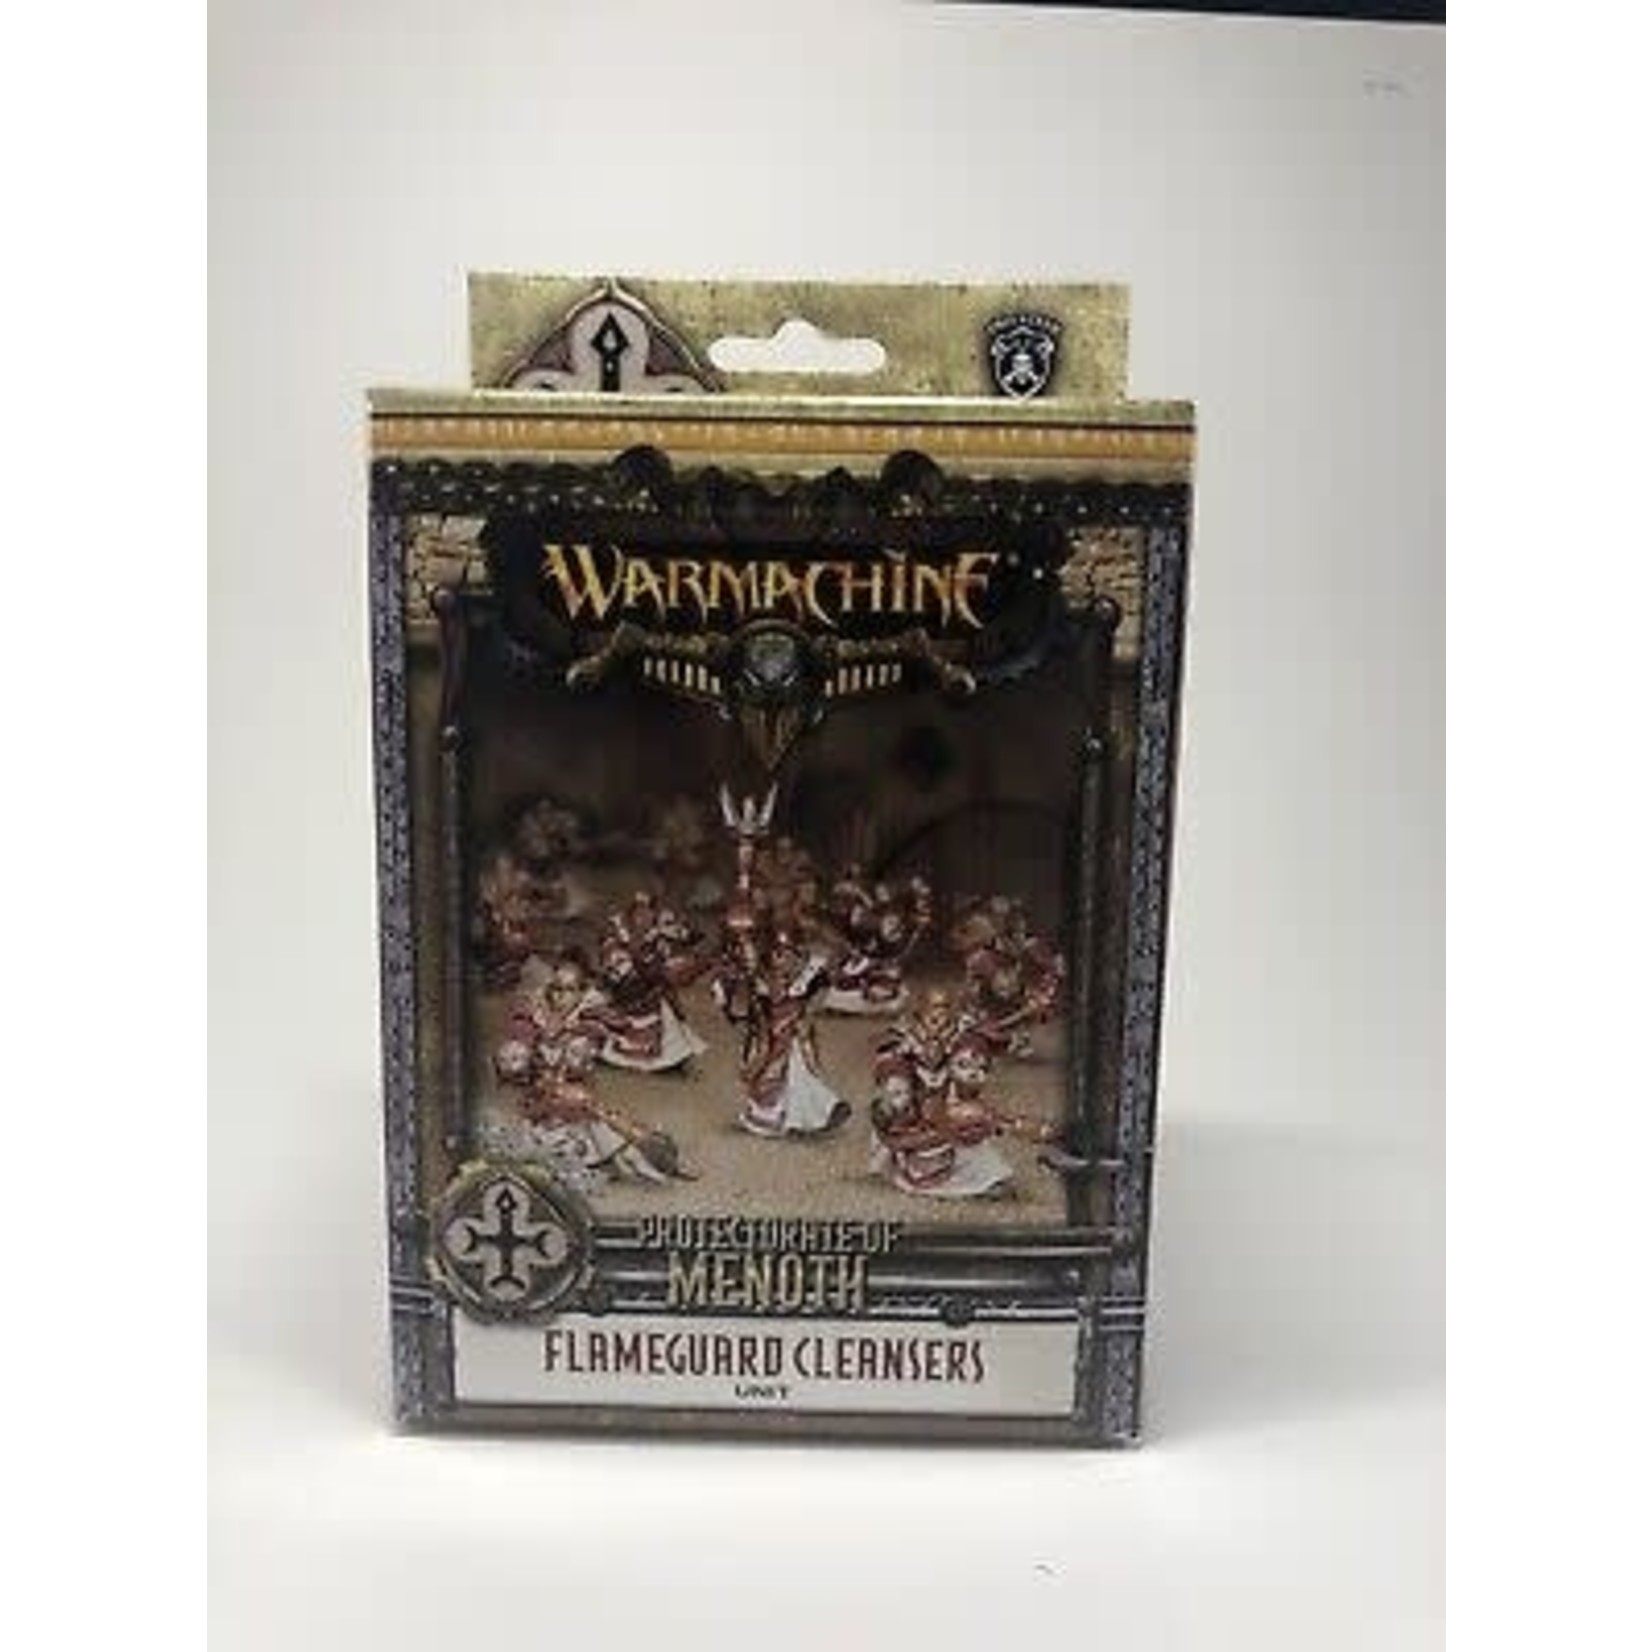 Privateer Press Warmachine: Protectorate of Menoth: Flameguard Cleansers